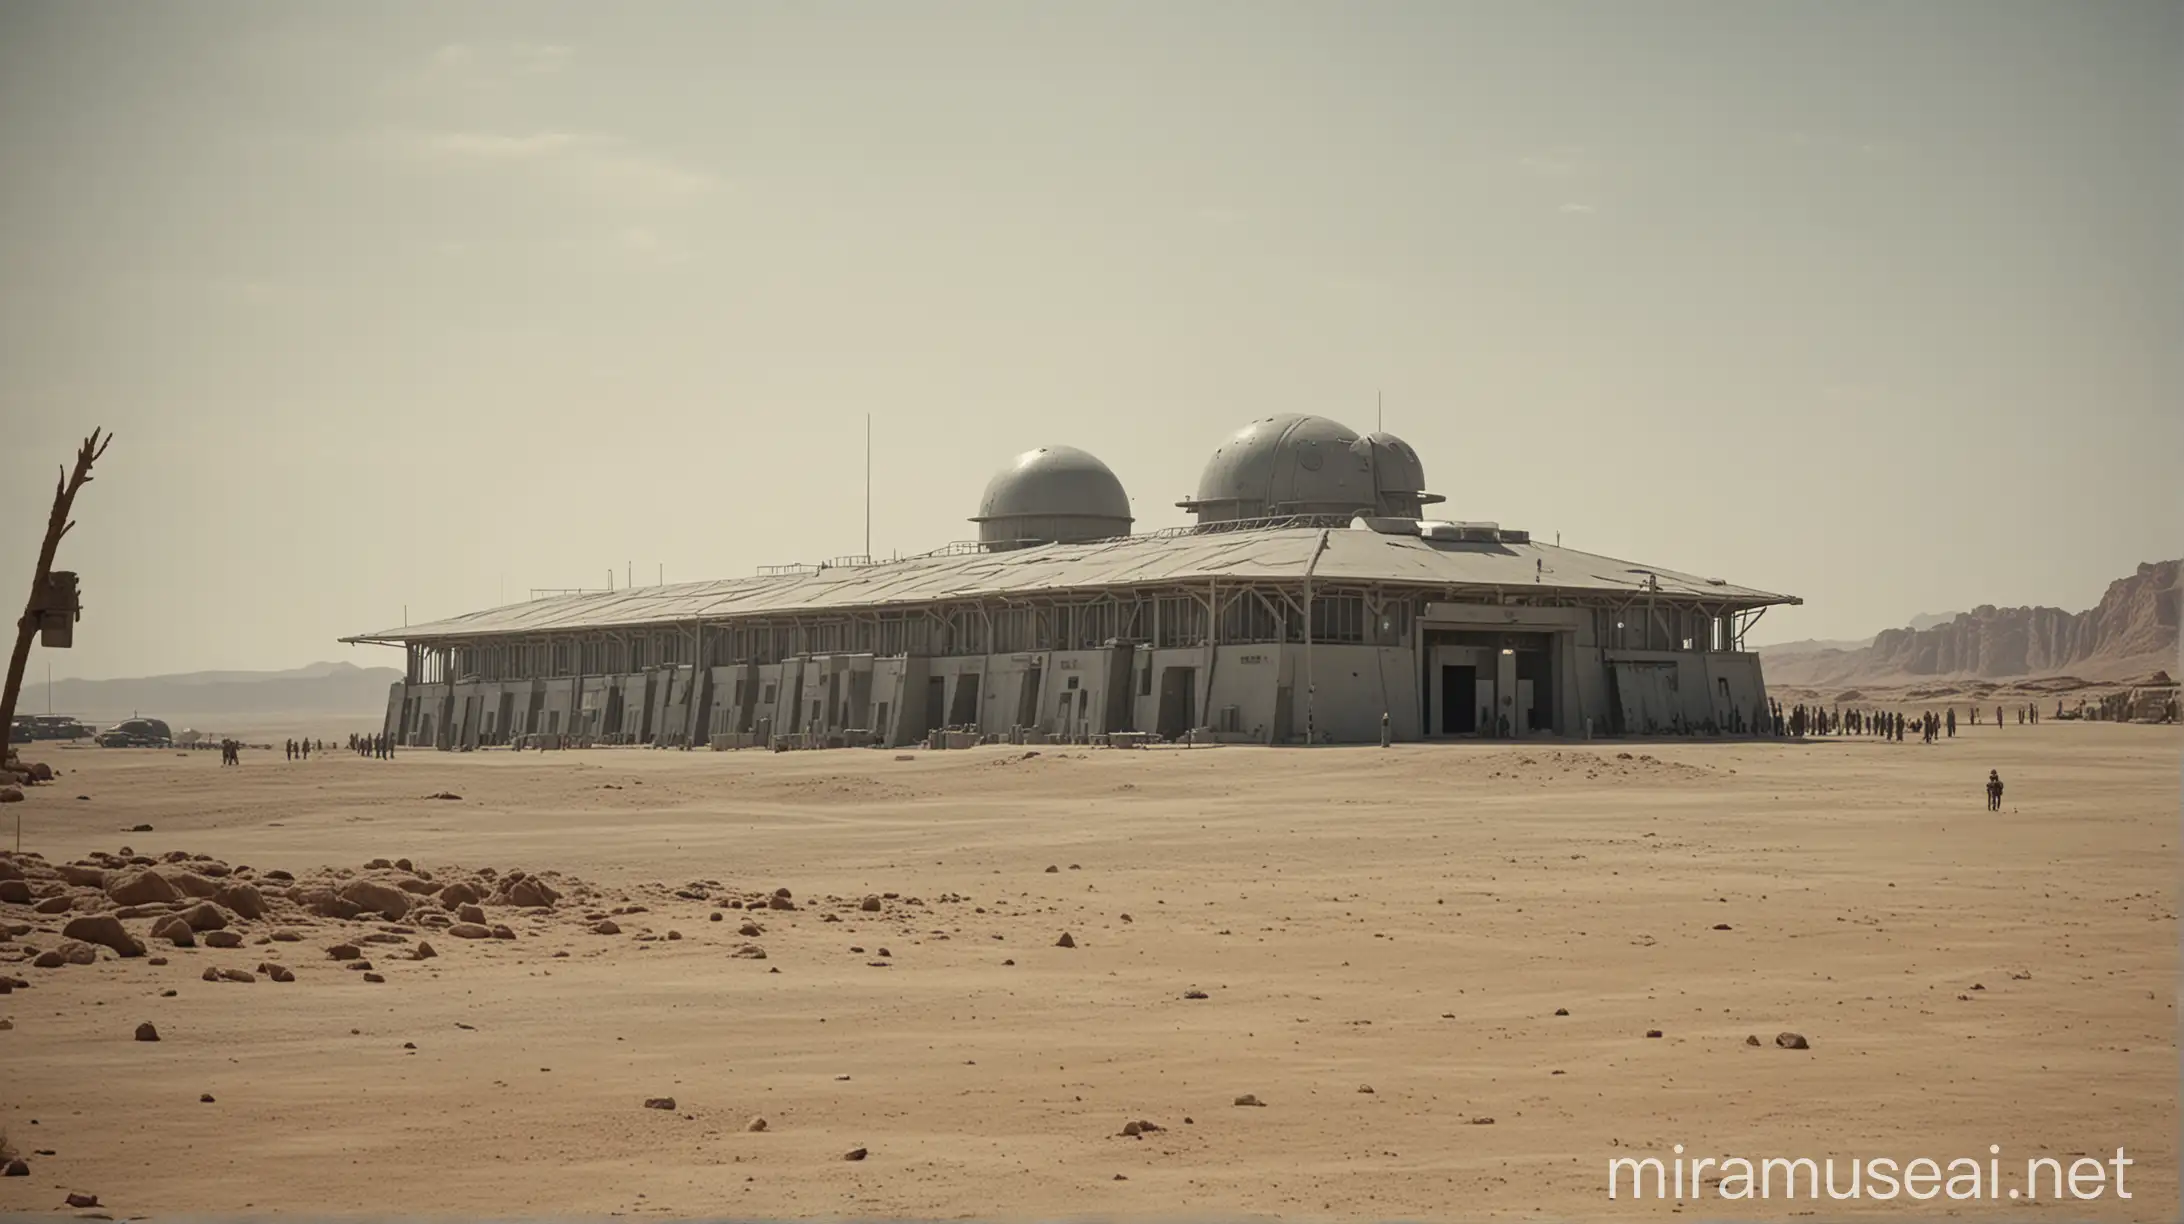 A LARGE PRISON-LIKE STRUCTURE, THAT IS A MILITARY BASE, ON A DESERT ALIEN PLANET, VERY HOT, MID DAY, FAR AWAY SHOT, BUILDING IS SMOOTH GREY COLOR, GUARDS DRESSED IN GREY MILITARY UNIFORMS STAND GUARD AROUND IT, HIGH DEFINITION